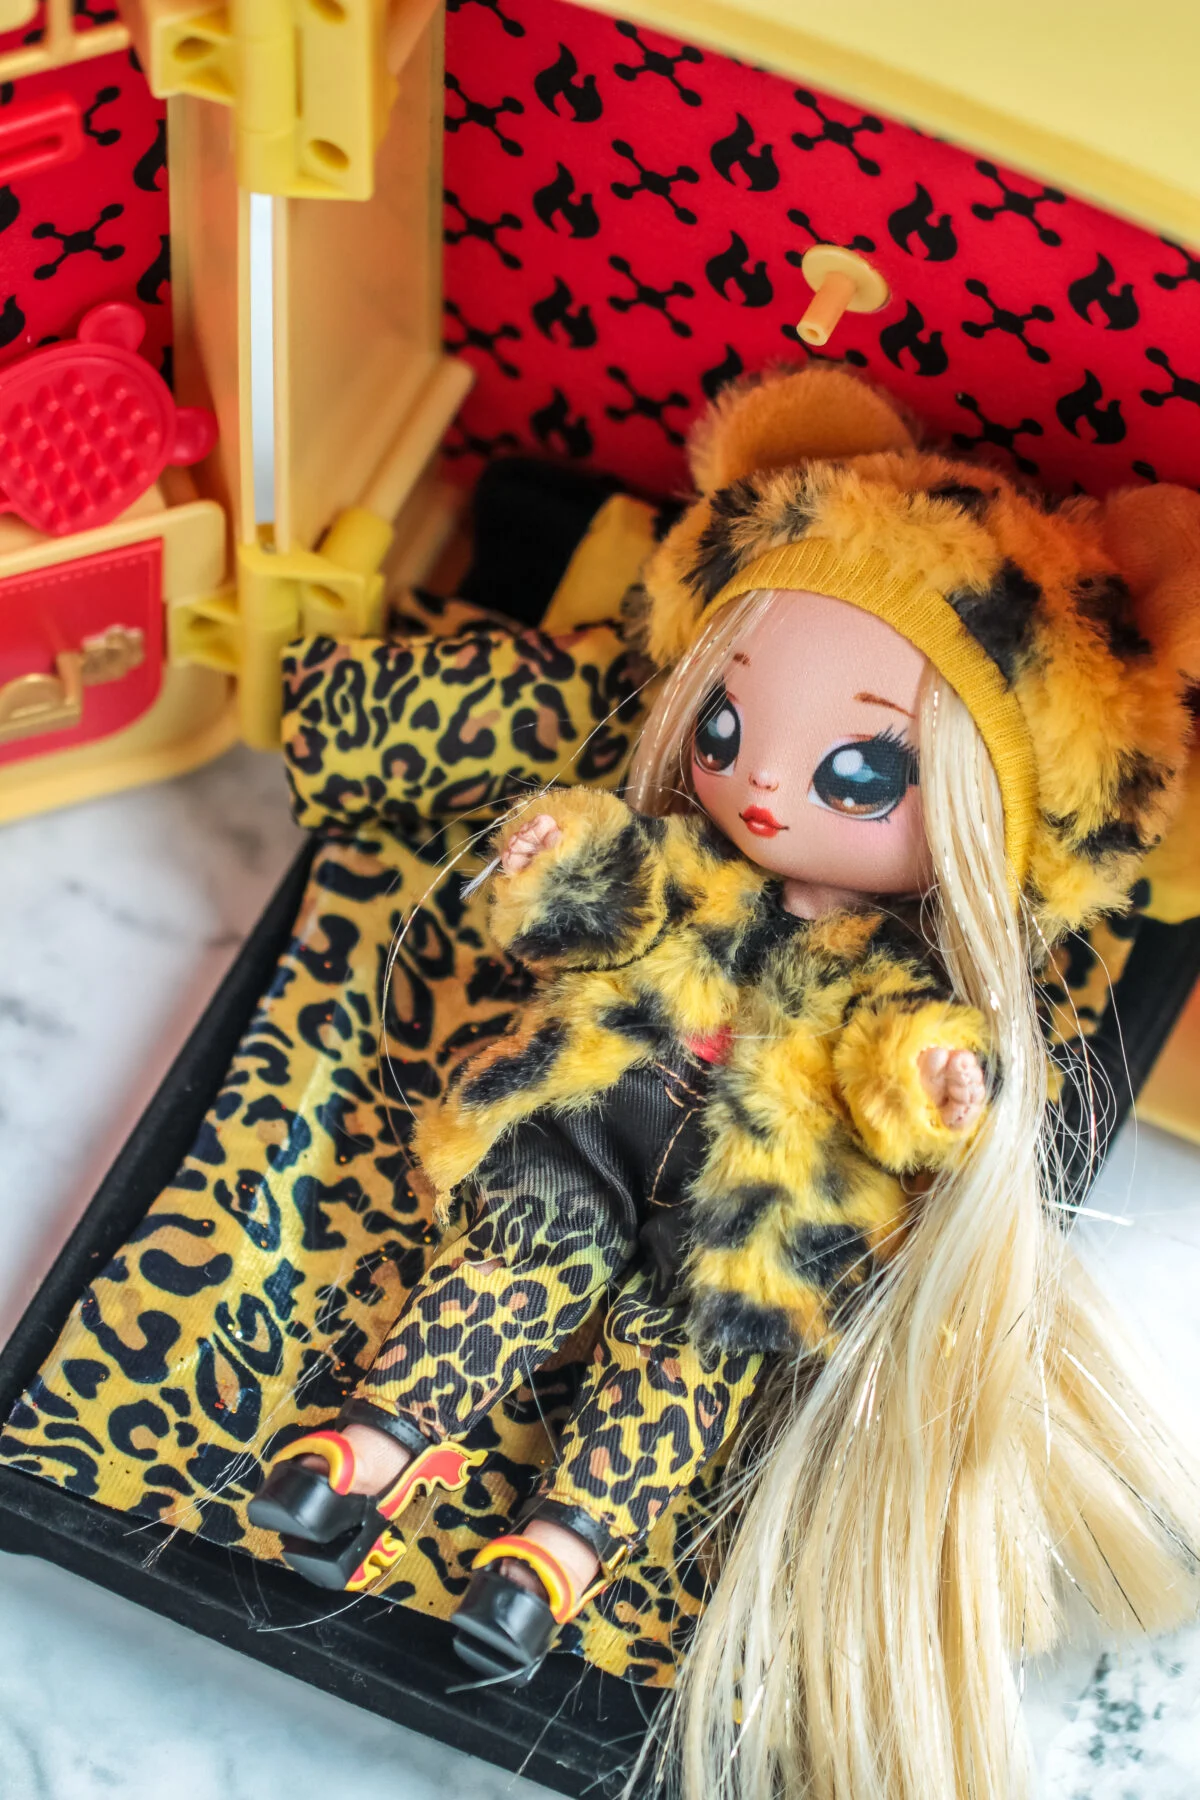 The Na! Na! Na! Surprise 3-in-1 Backpack Bedroom Playset is a fuzzy jaguar backpack that transforms into an adorable bedroom playset.